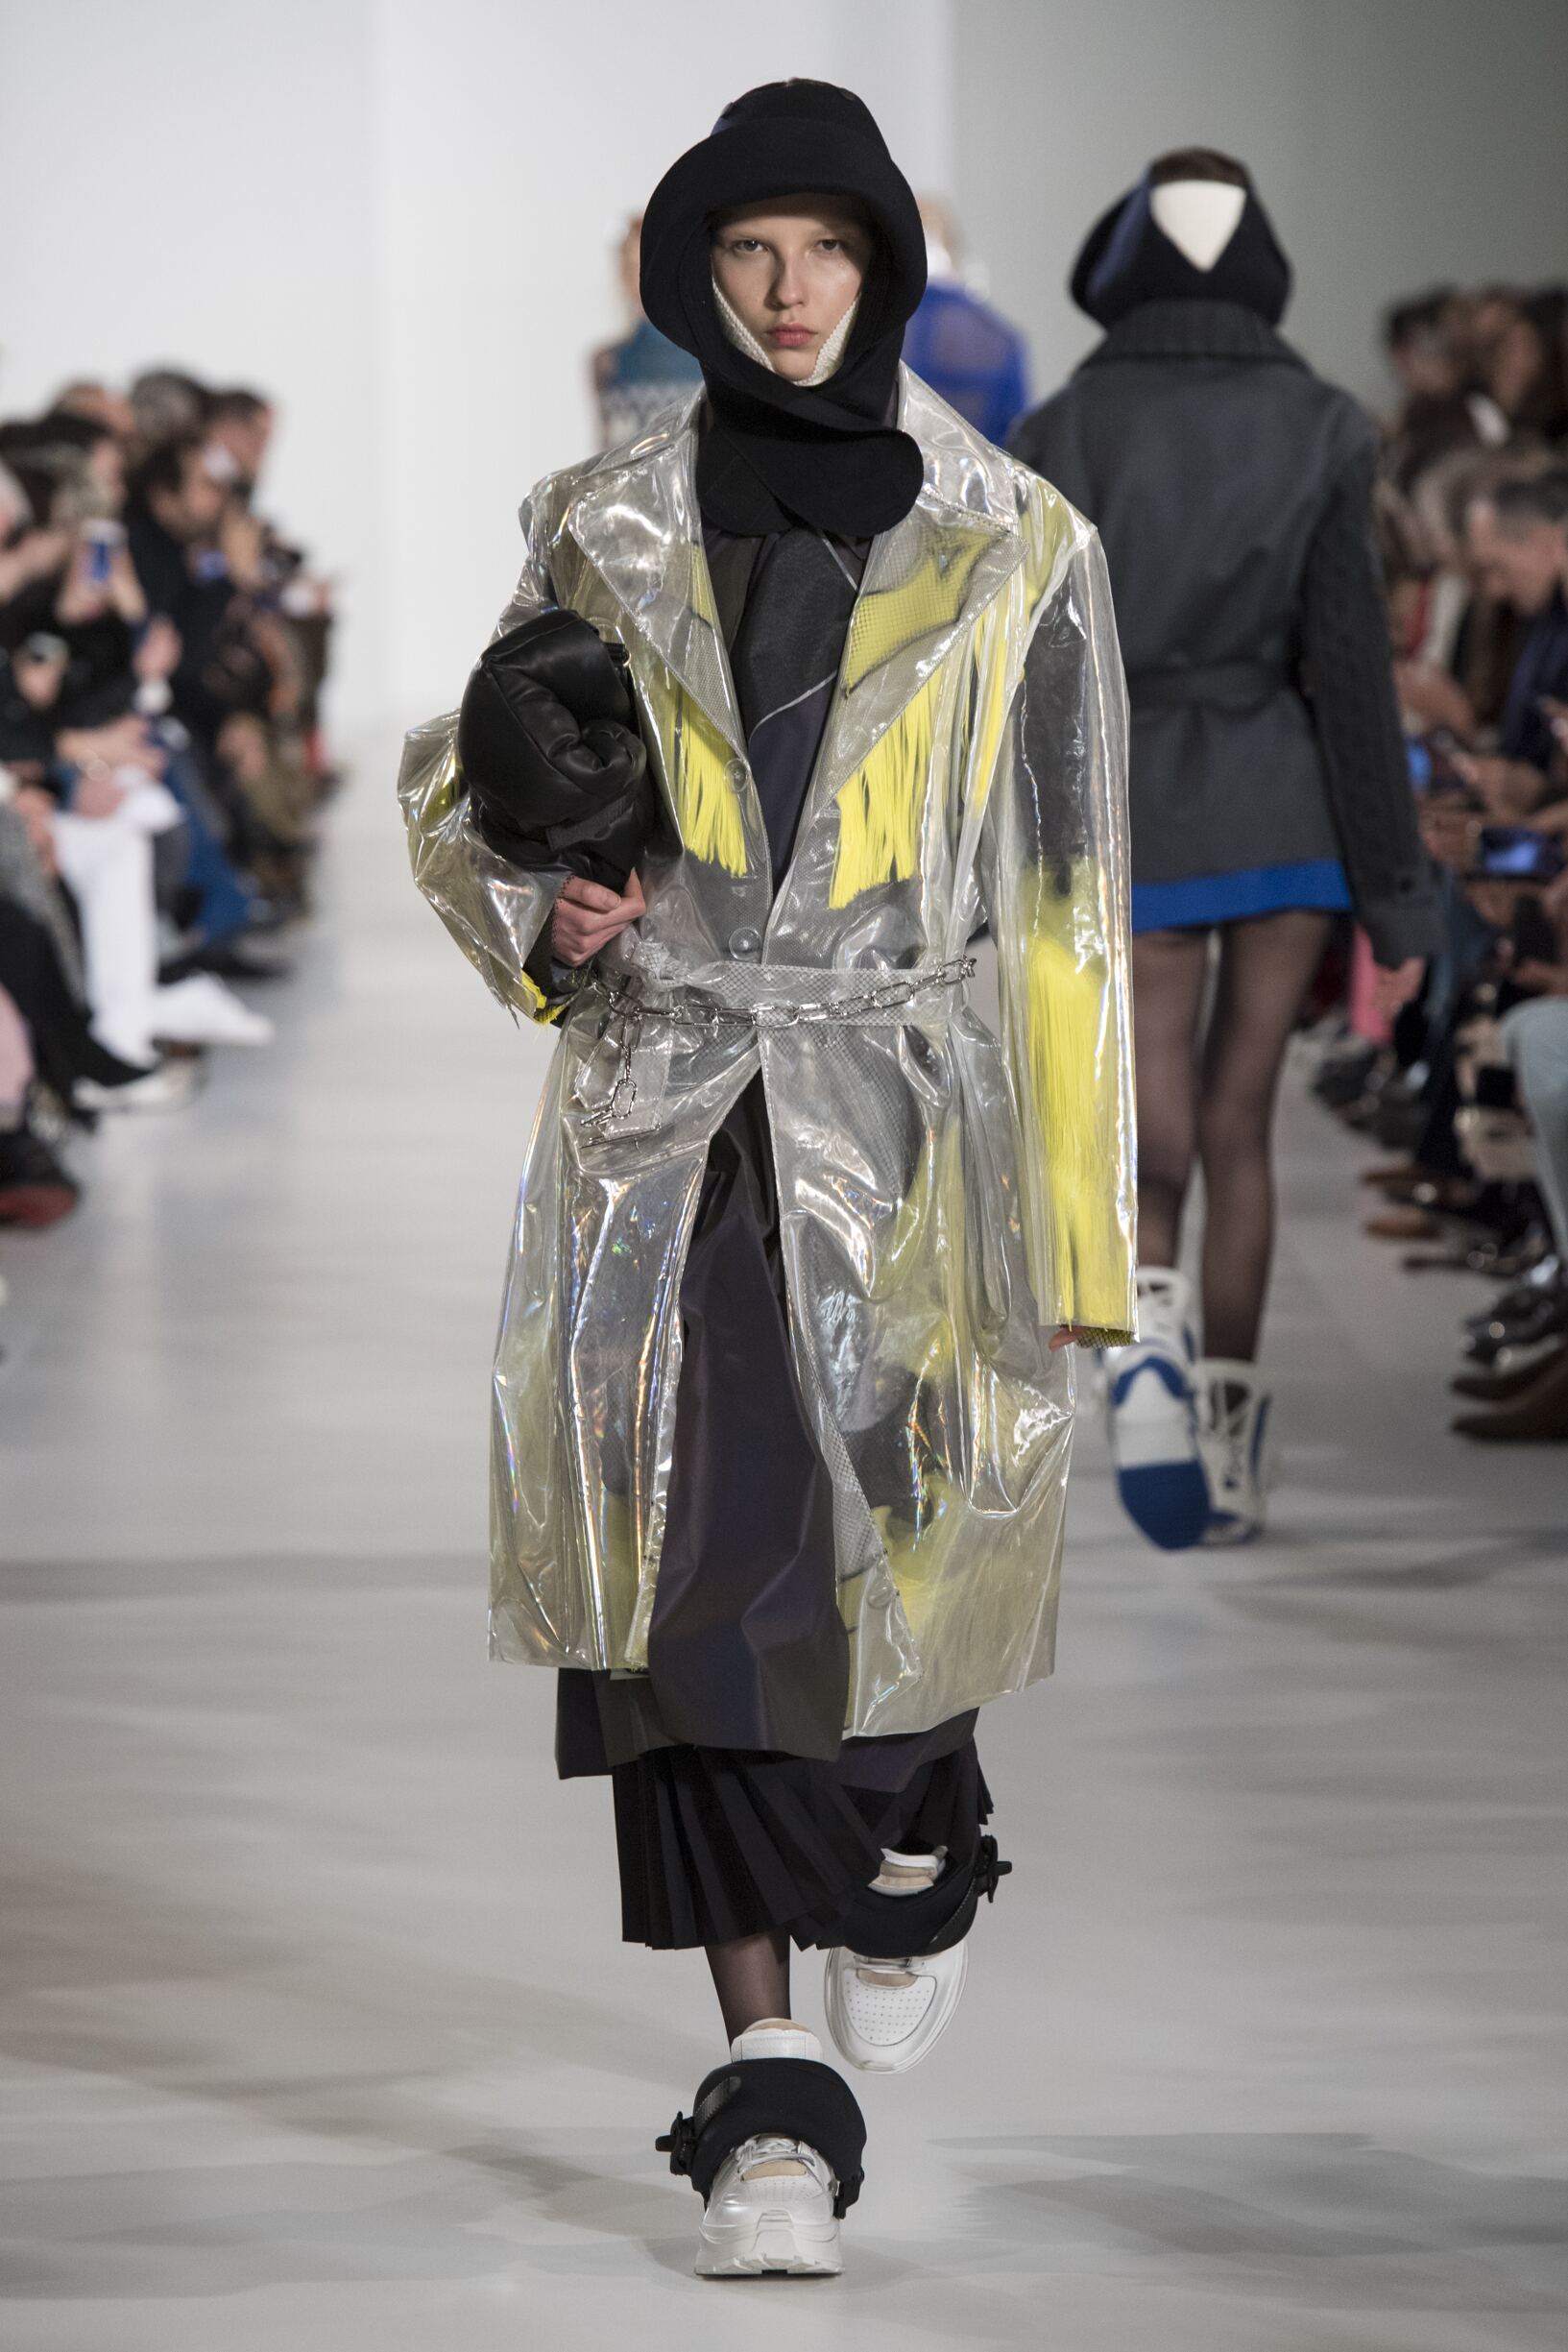 MAISON MARGIELA FALL WINTER 2018 WOMEN'S COLLECTION The